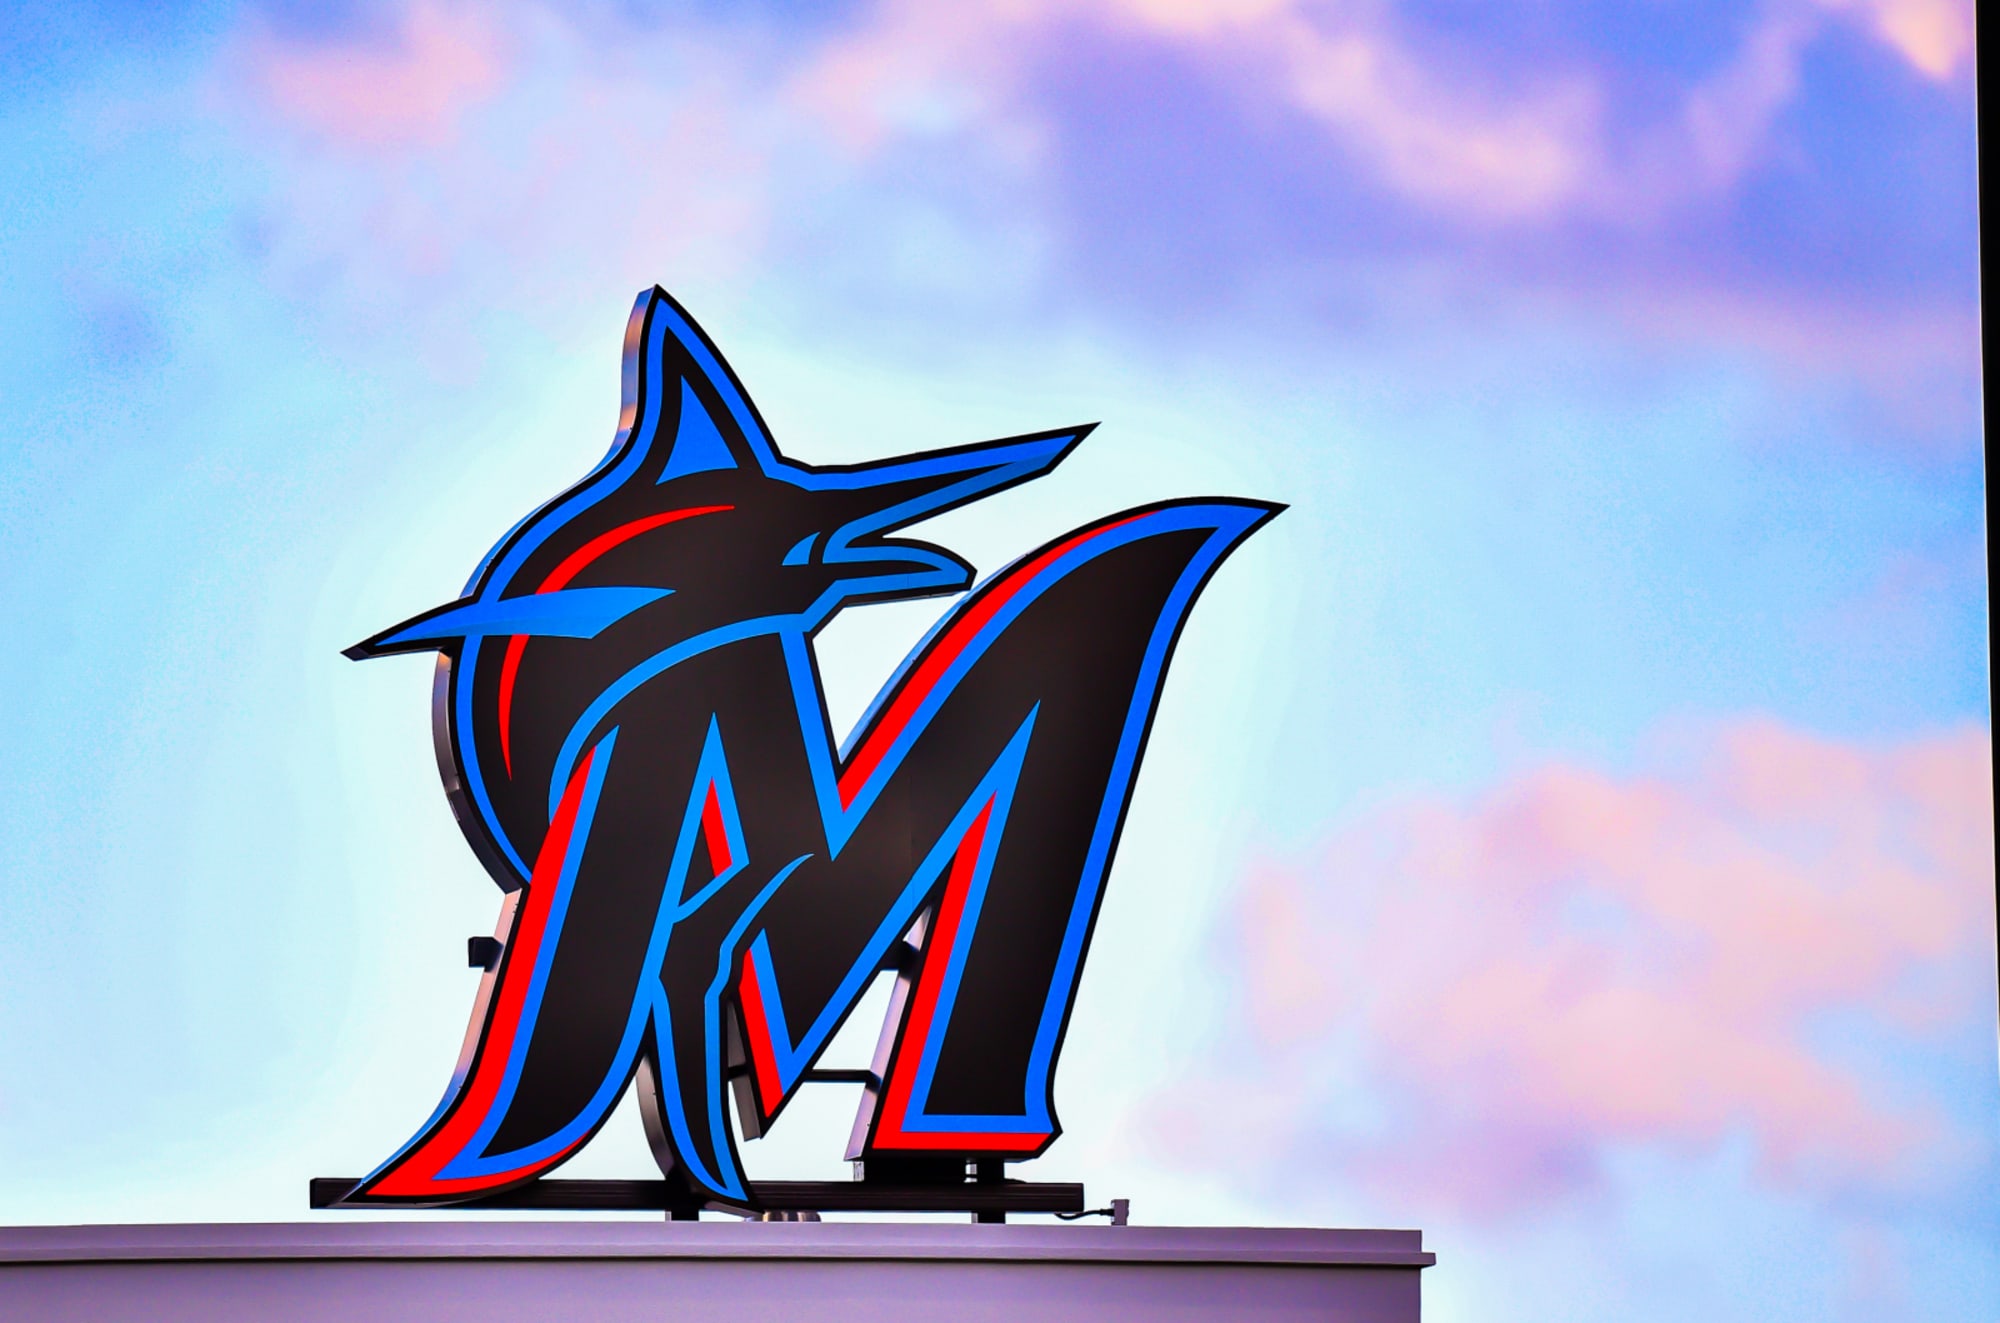 Instagram account leaks what could be new Marlins logo